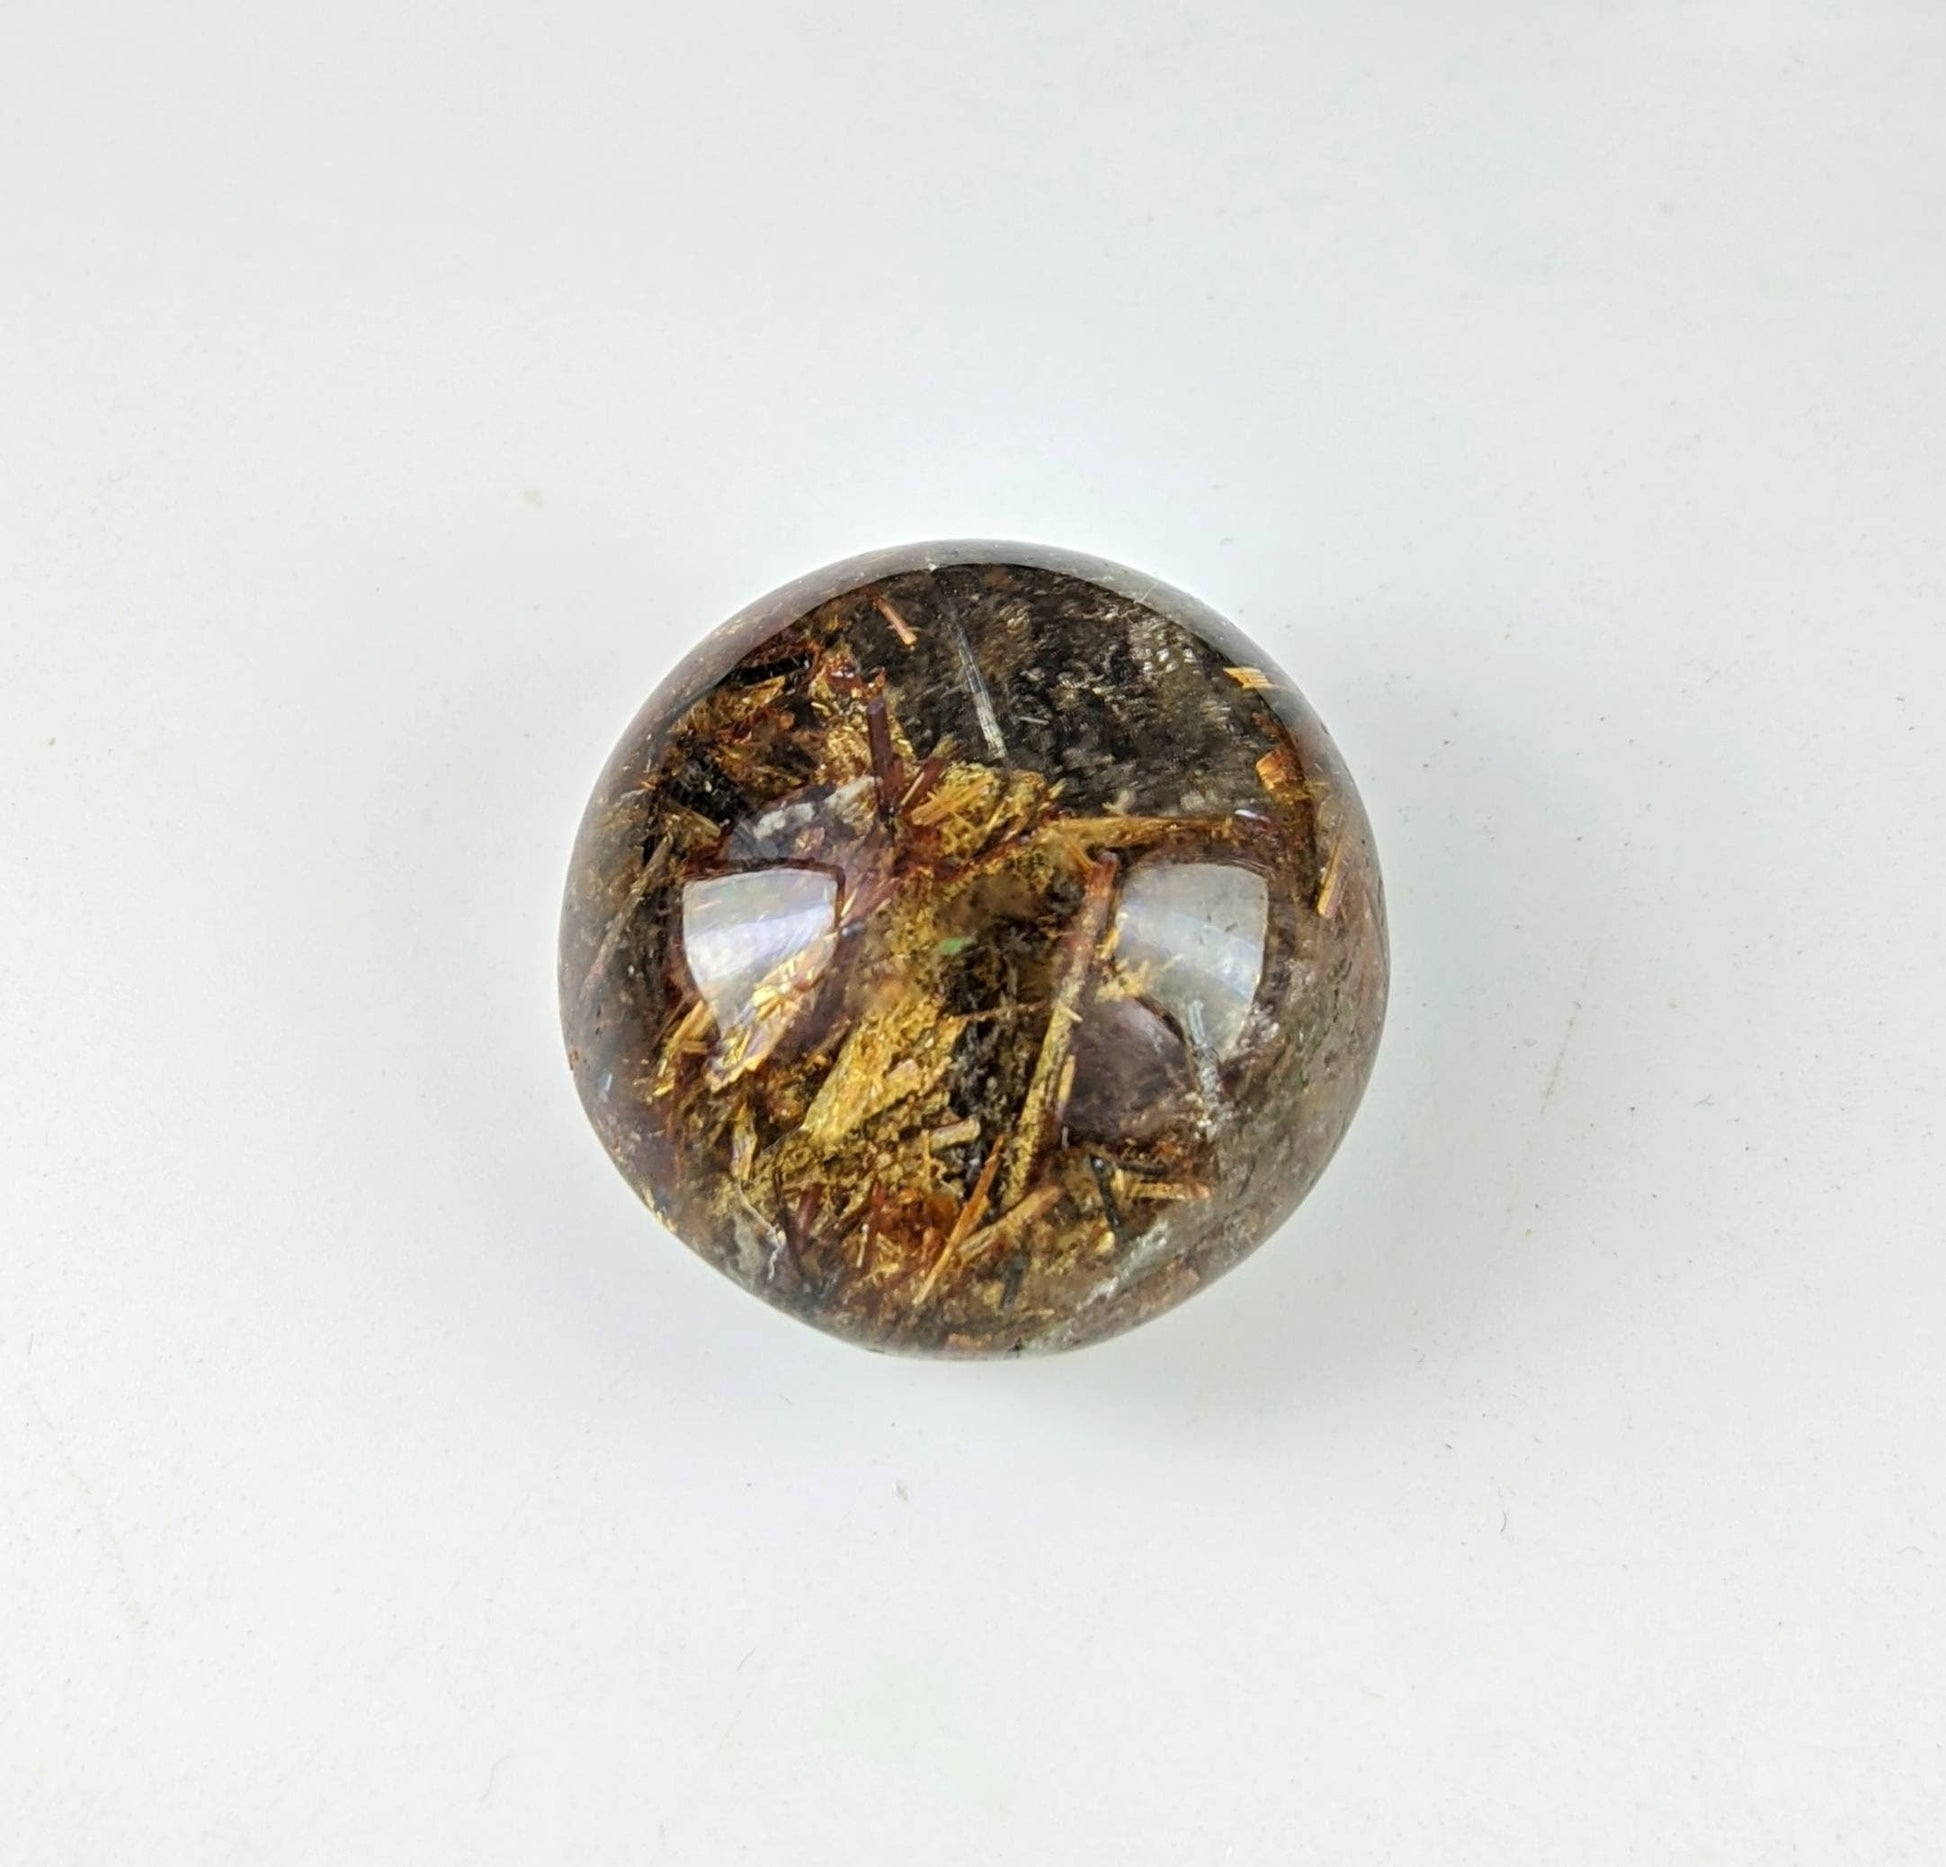 ARSAA GEMS AND MINERALSNatural fine quality nice clarity golden Rutile included cabochon from Zagi Mountain KP Pakistan, weight 11.6 grams - Premium  from ARSAA GEMS AND MINERALS - Just $40.00! Shop now at ARSAA GEMS AND MINERALS